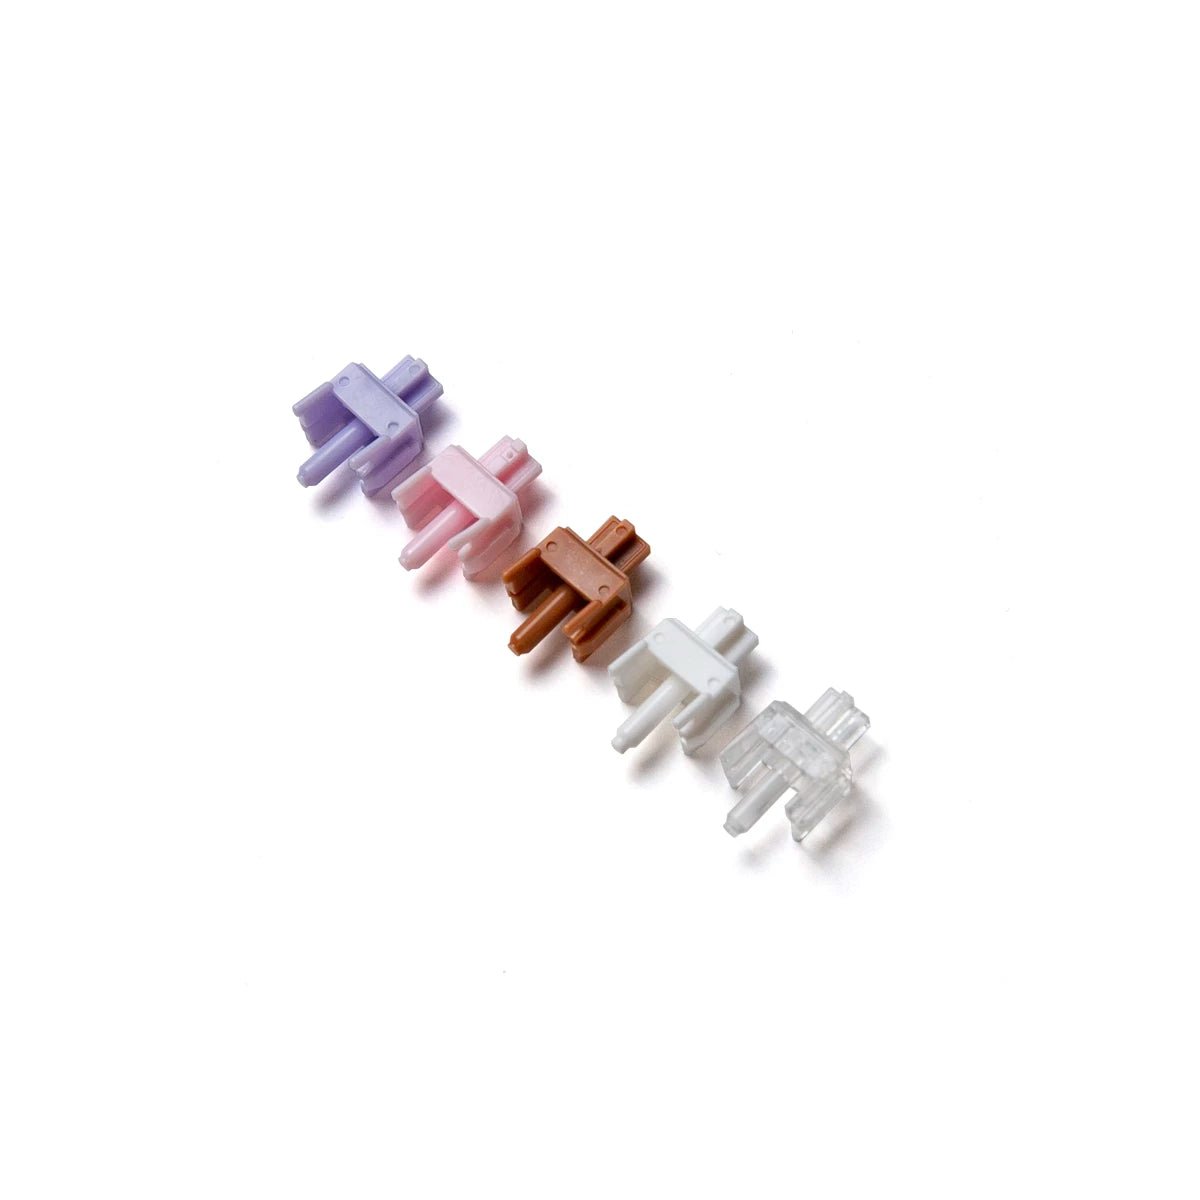 Tecsee Ice Cream Tester Pack Switches - Divinikey